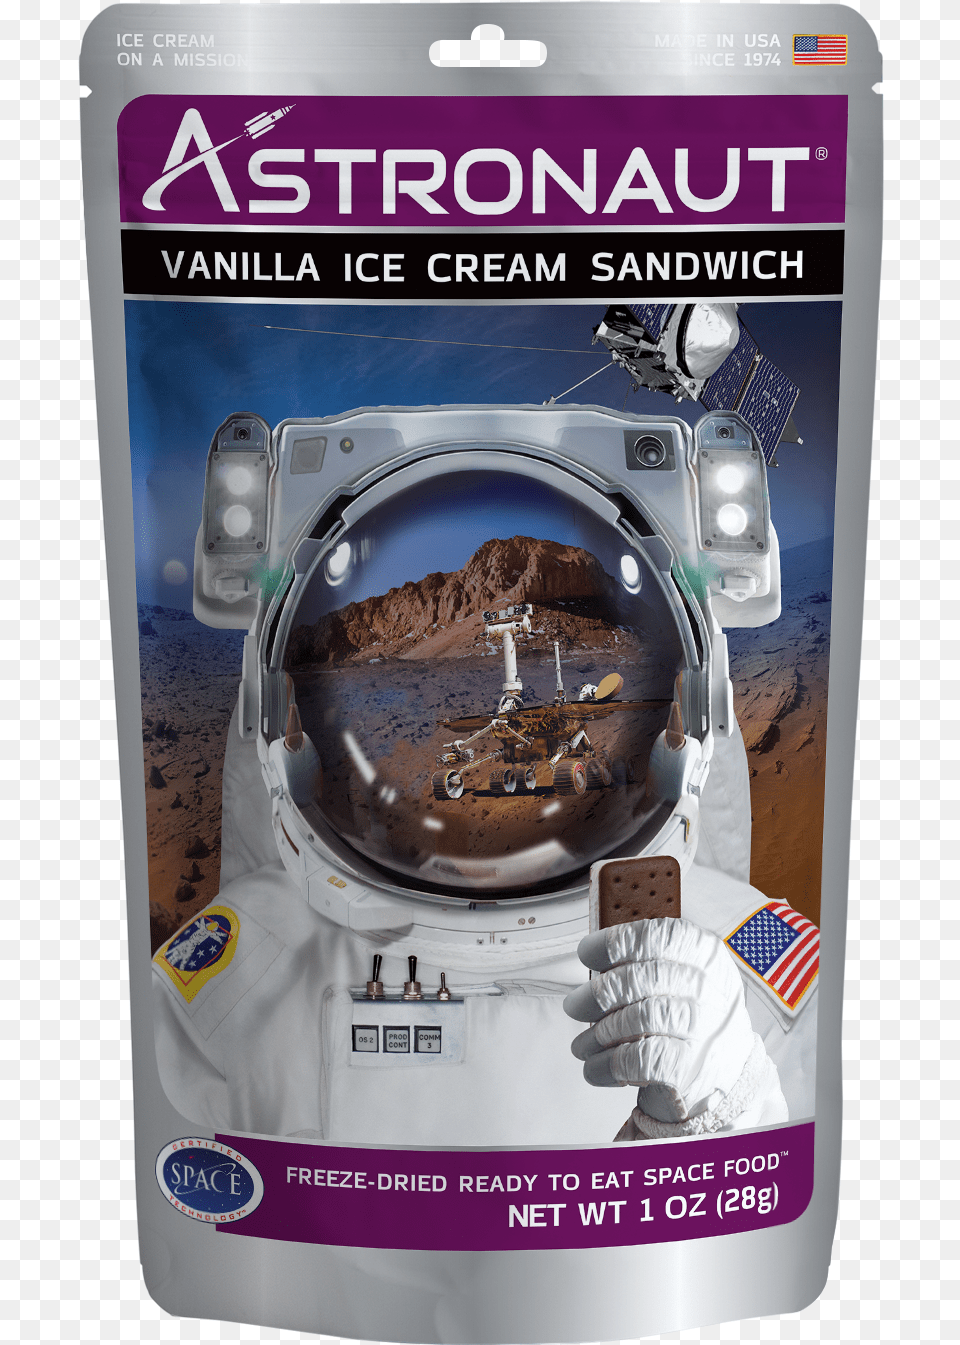 Astronaut Freeze Dried Ice Cream Sandwich 6 Vanilla Astronaut Cookies And Cream Ice Cream Sandwich, Clothing, Glove, Astronomy, Outer Space Free Transparent Png